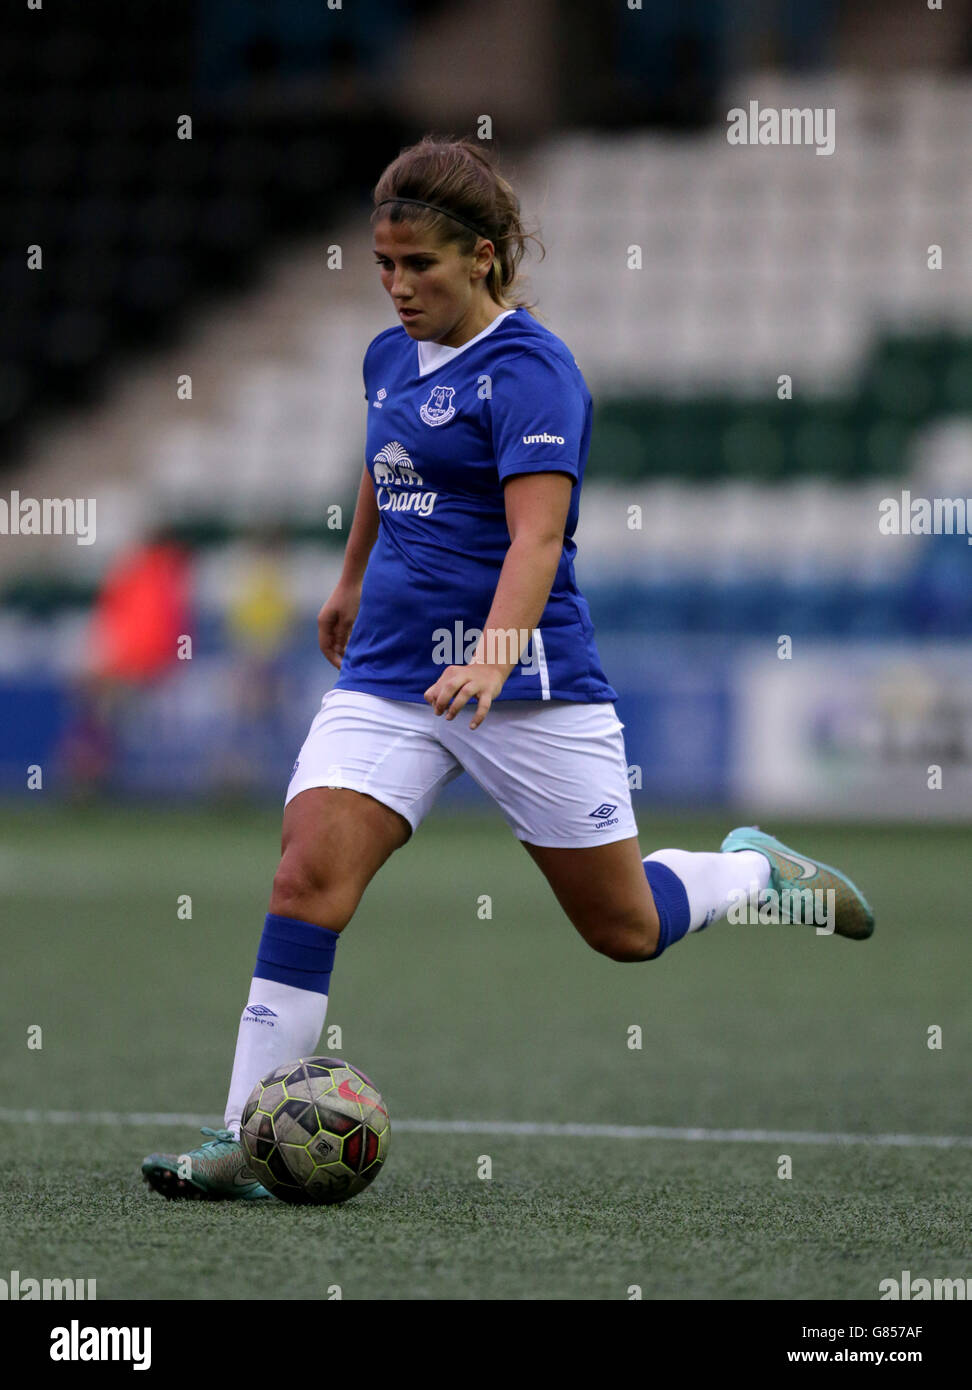 Soccer - FA Women's Super League Continental Cup - Group Two - Everton Ladies v Liverpool Ladies - Select Security Stadium. Everton's Paige Williams Stock Photo